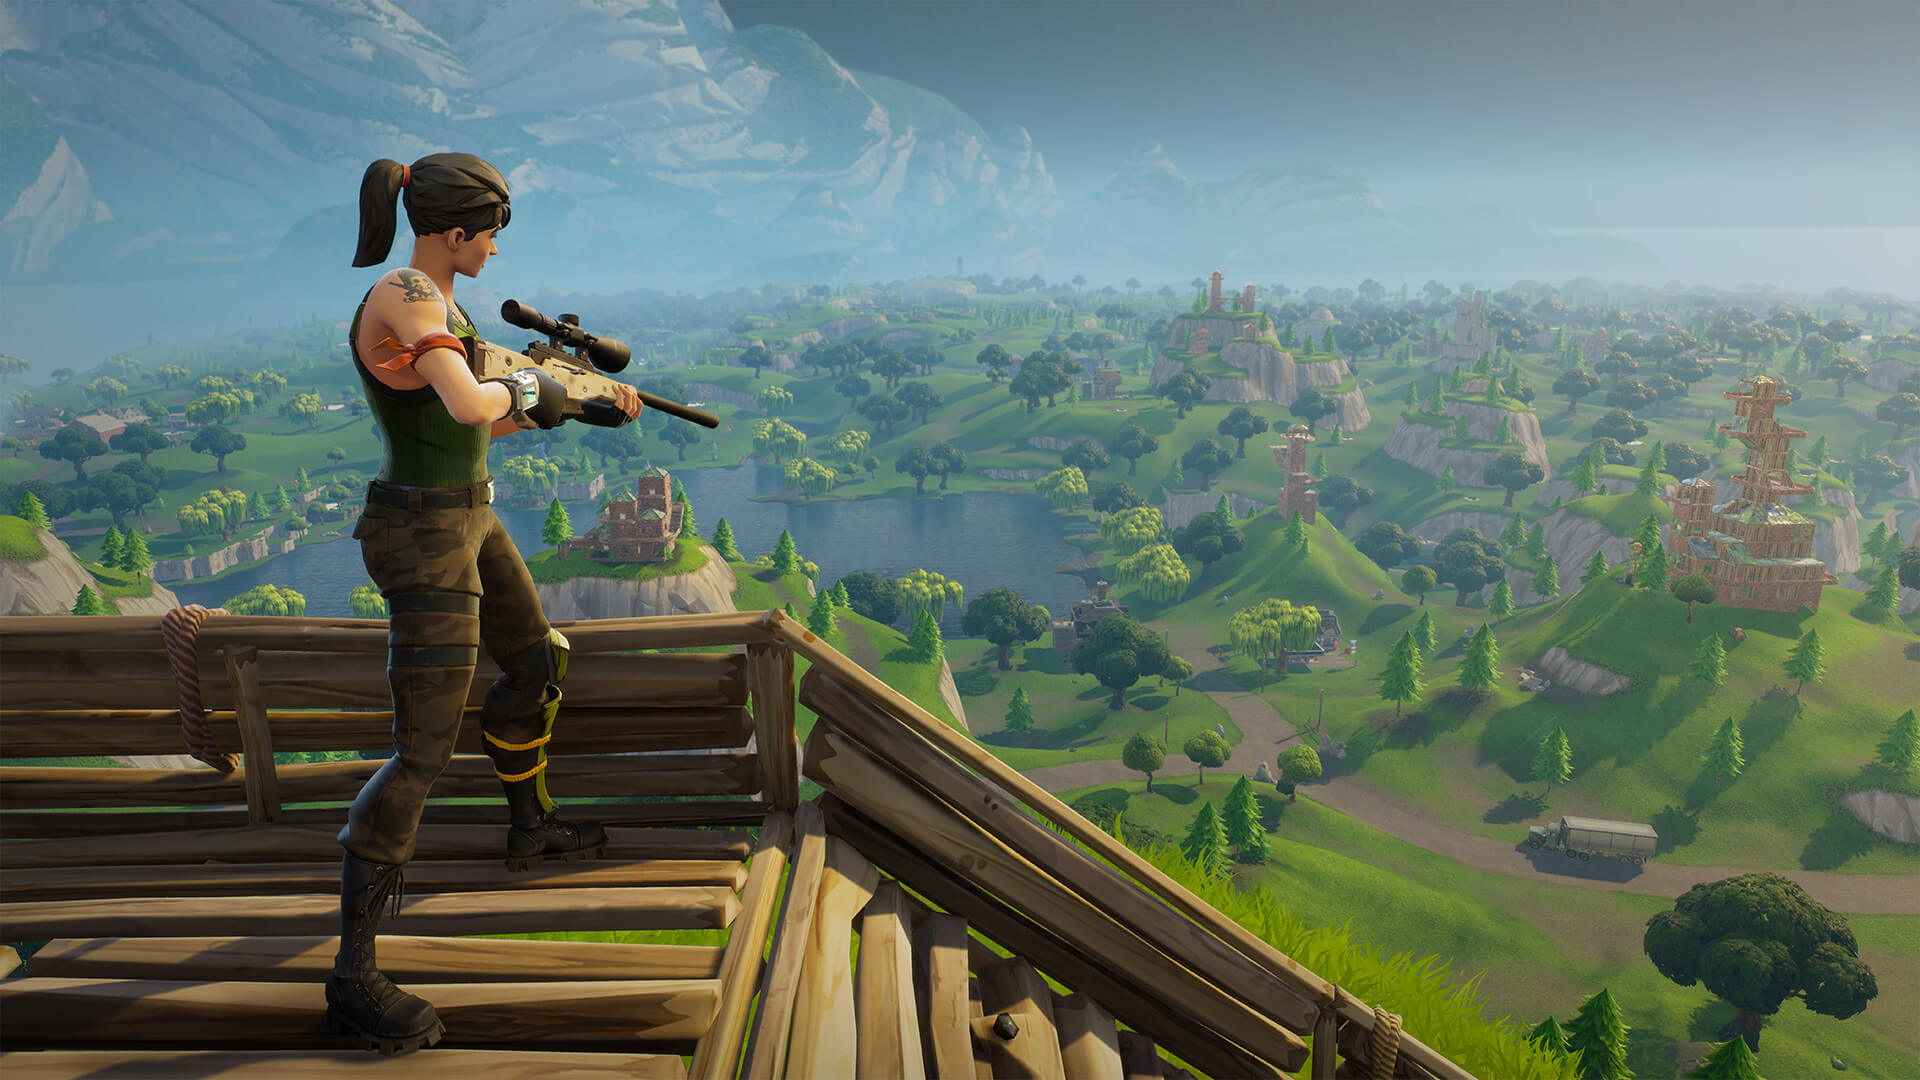 Best free PC games: Fortnite. Image shows a female character holding a gun and look out over a forest.